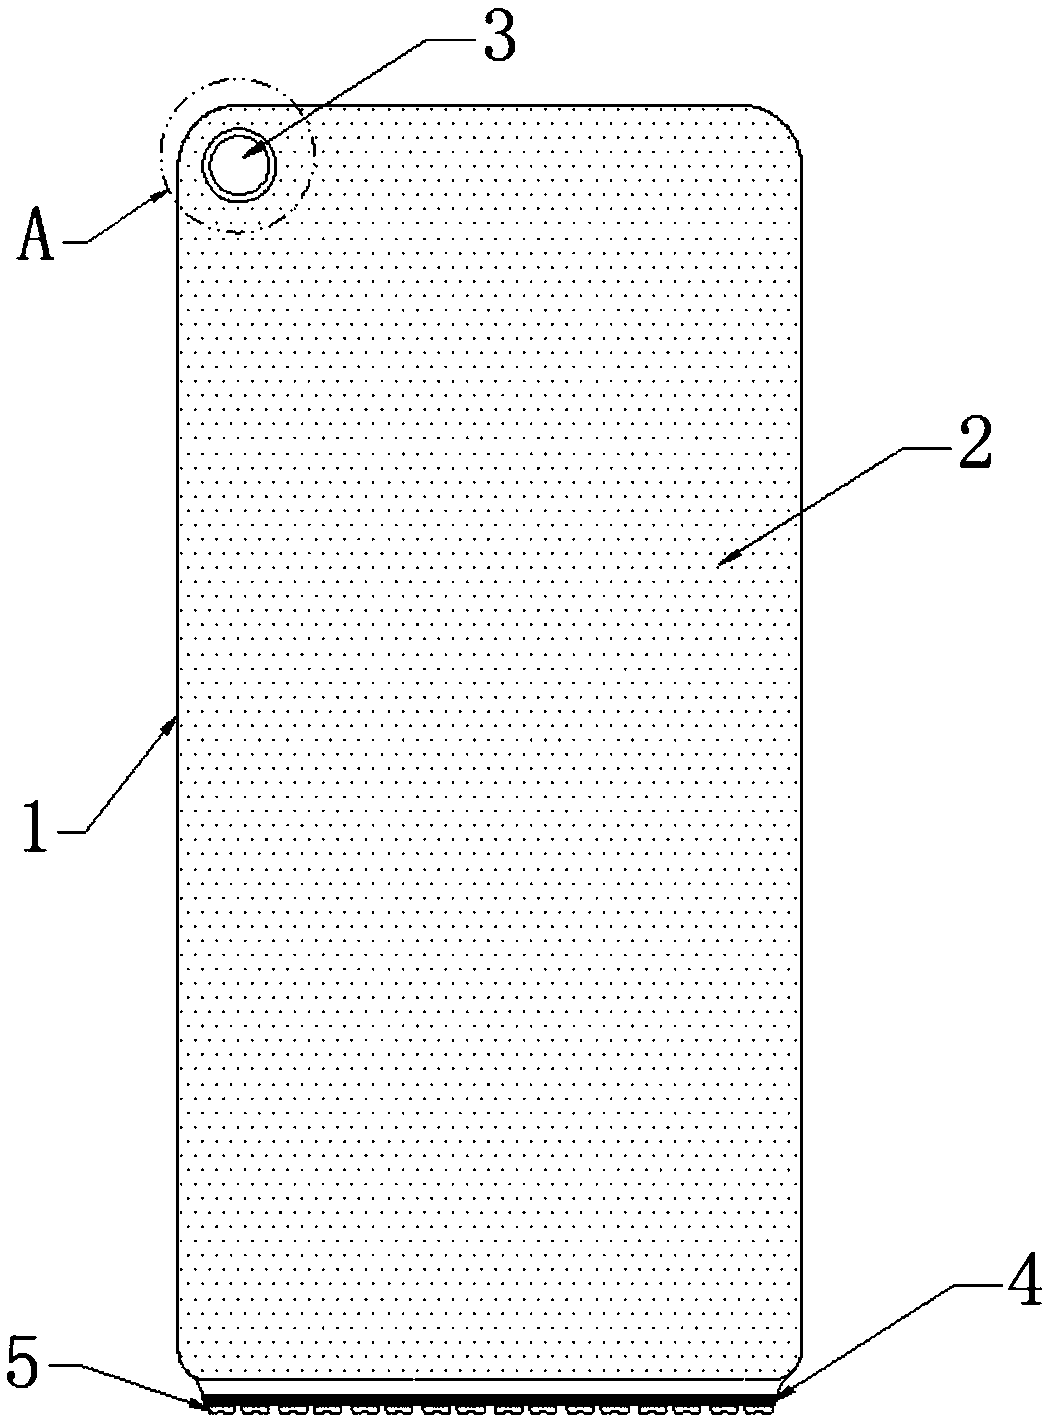 Light guide plate with hole structure